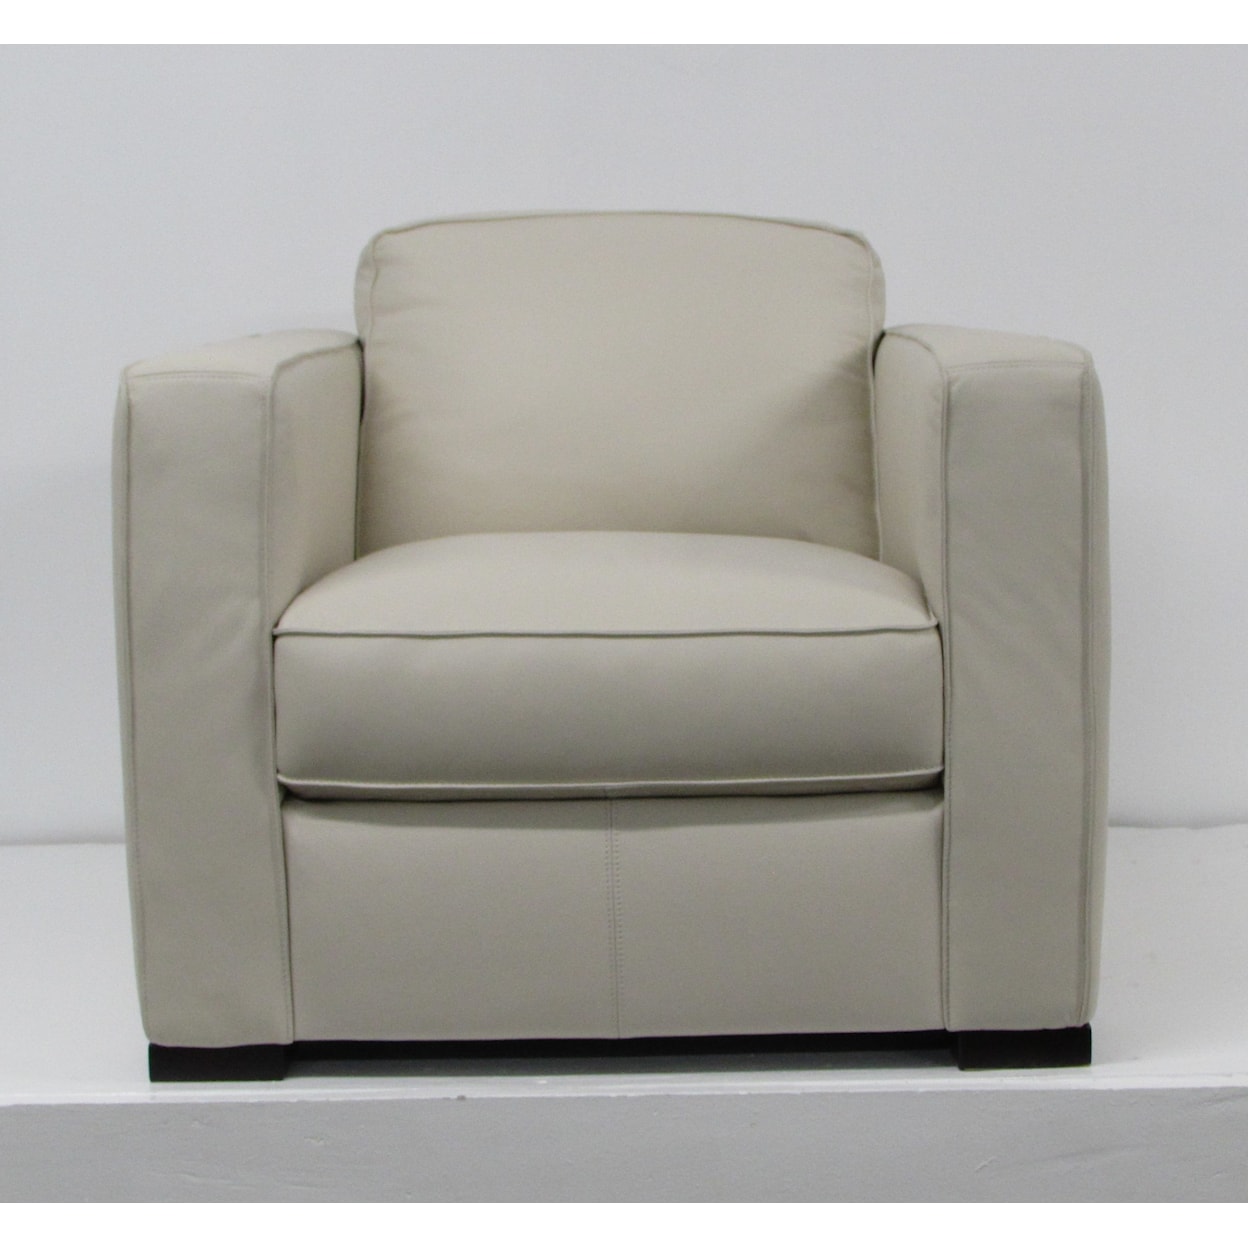 Natuzzi Editions C274 Leather Collection C274 Ivory Leather Chair